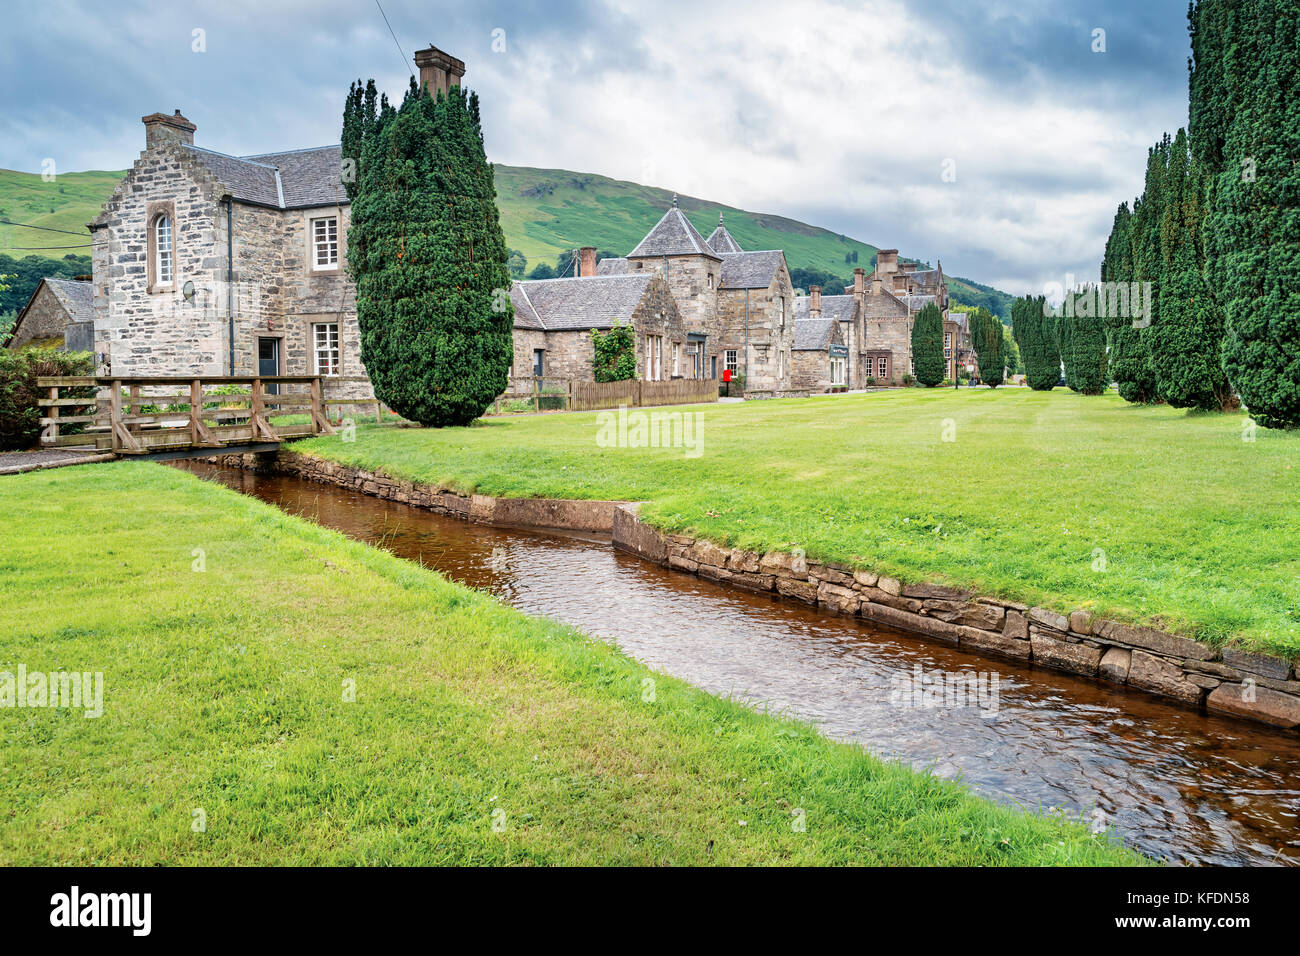 Row of stone houses in the town of Blair Atholl, part of Cairngorms National Park in Perthshire, Scotland, UK. Stock Photo